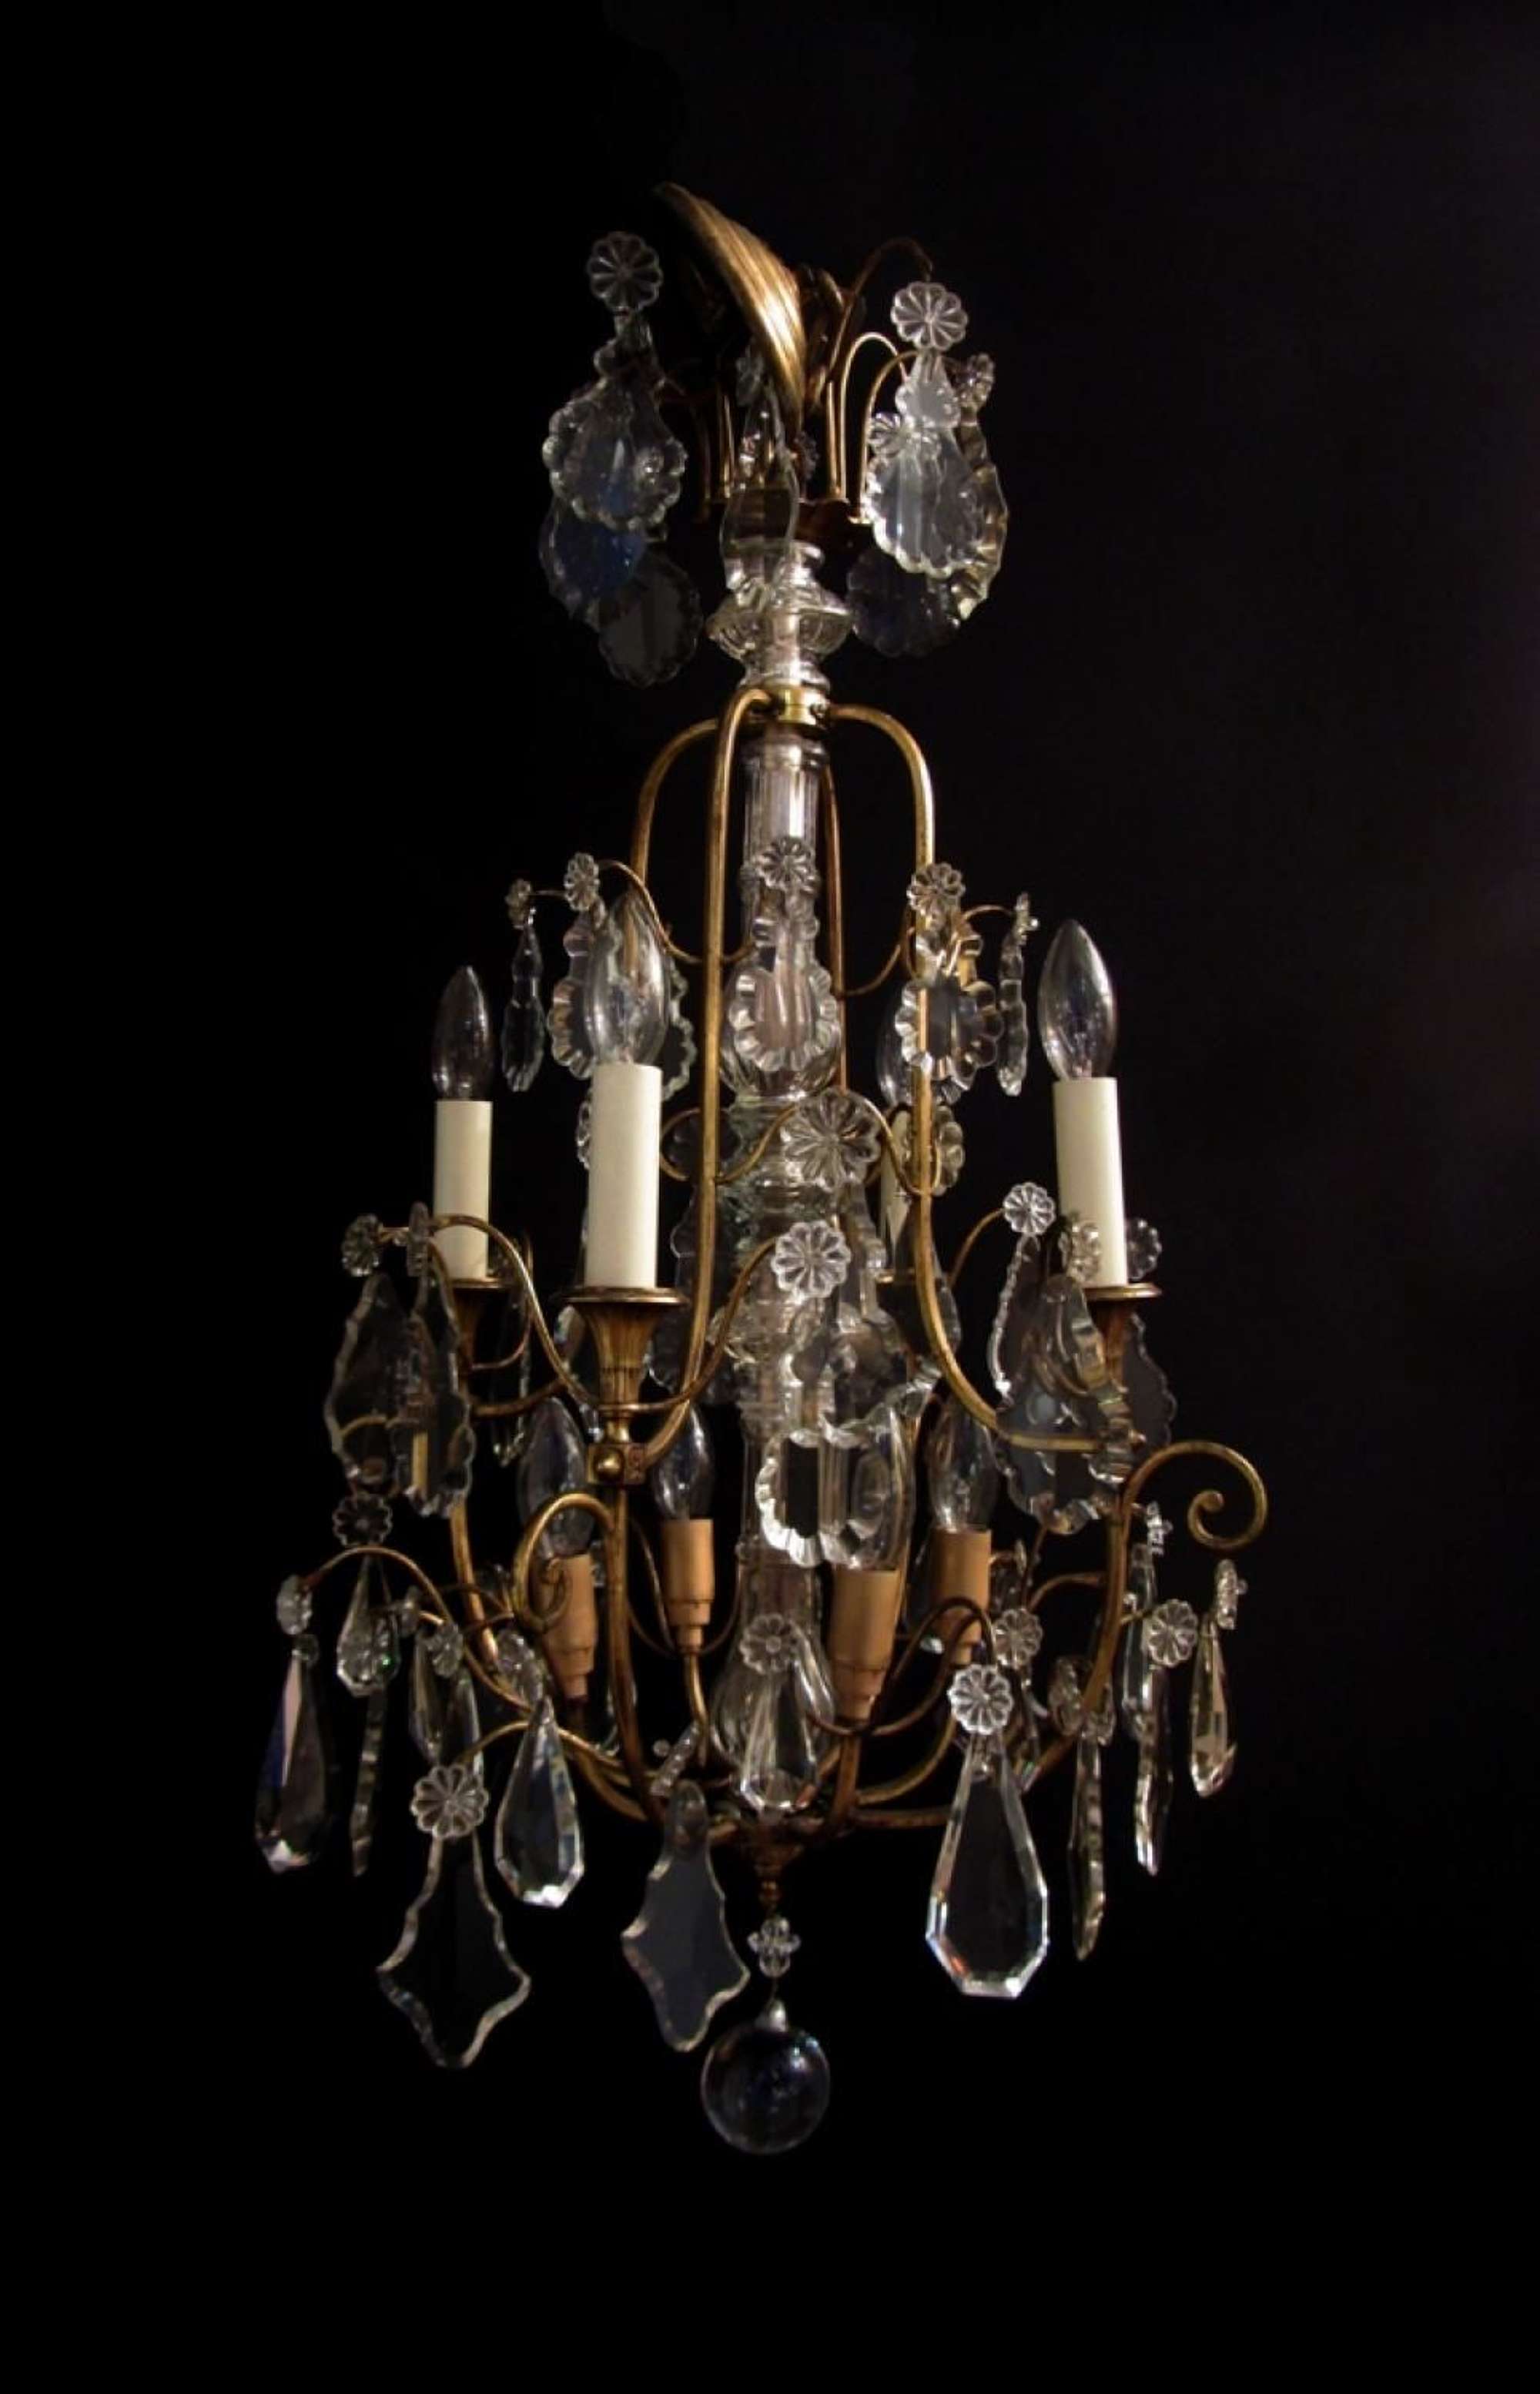 A decorative gilt lacquered brass chandelier